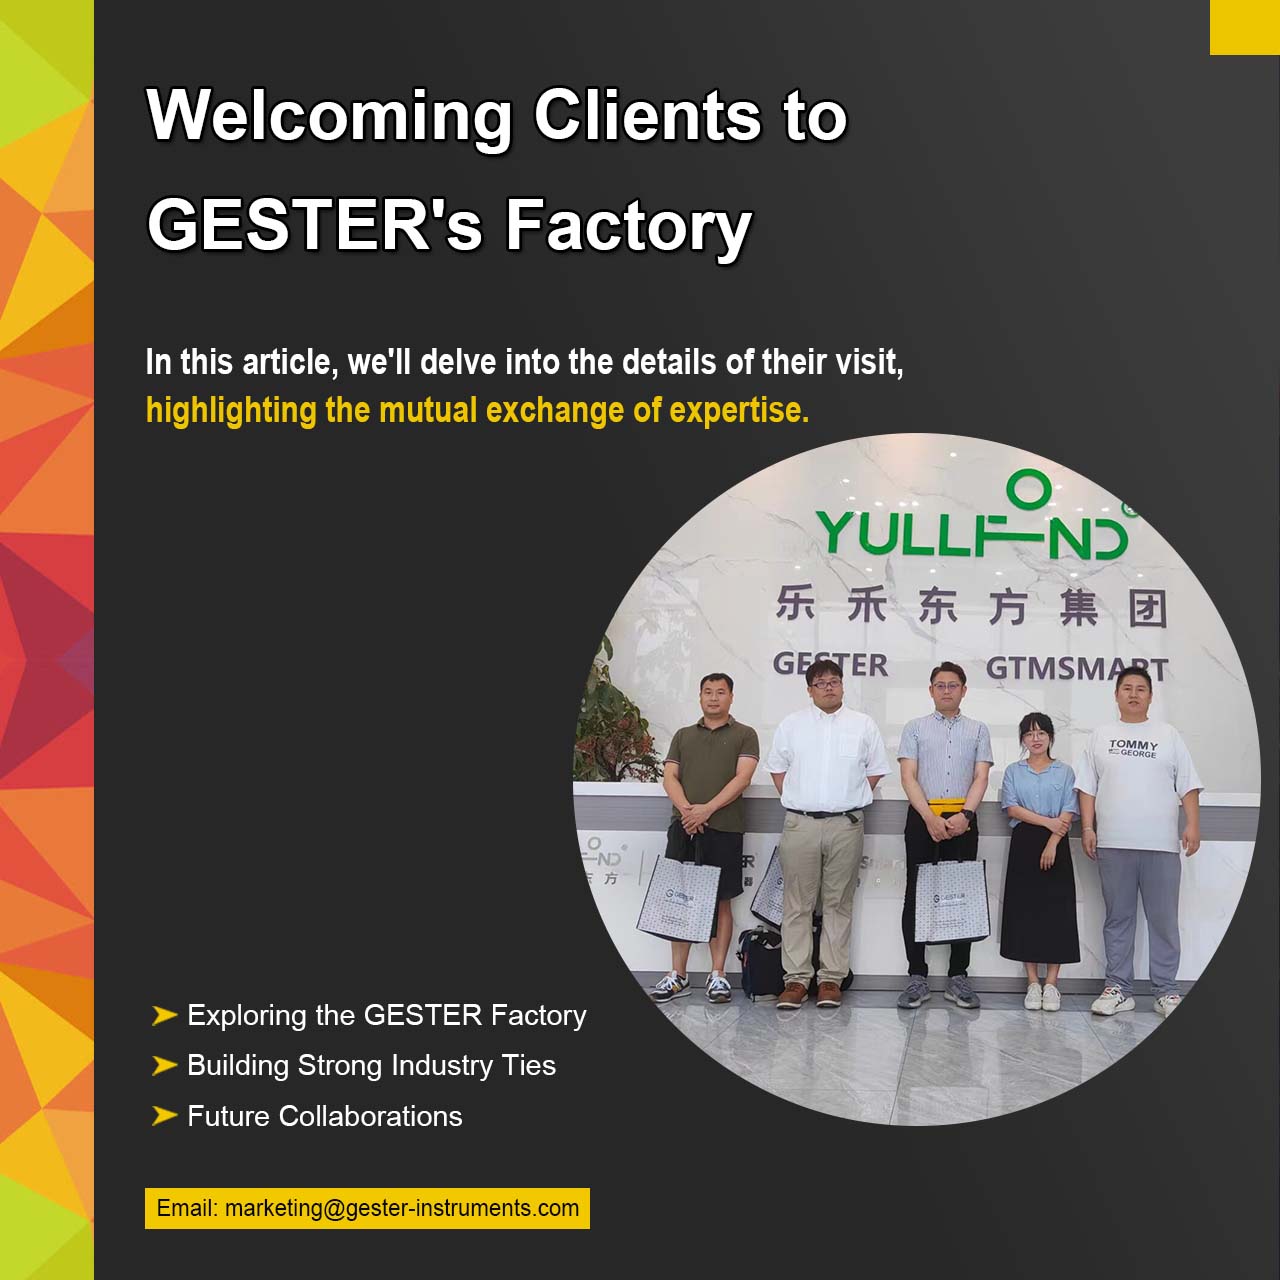 Welcoming Clients to GESTER's Factory